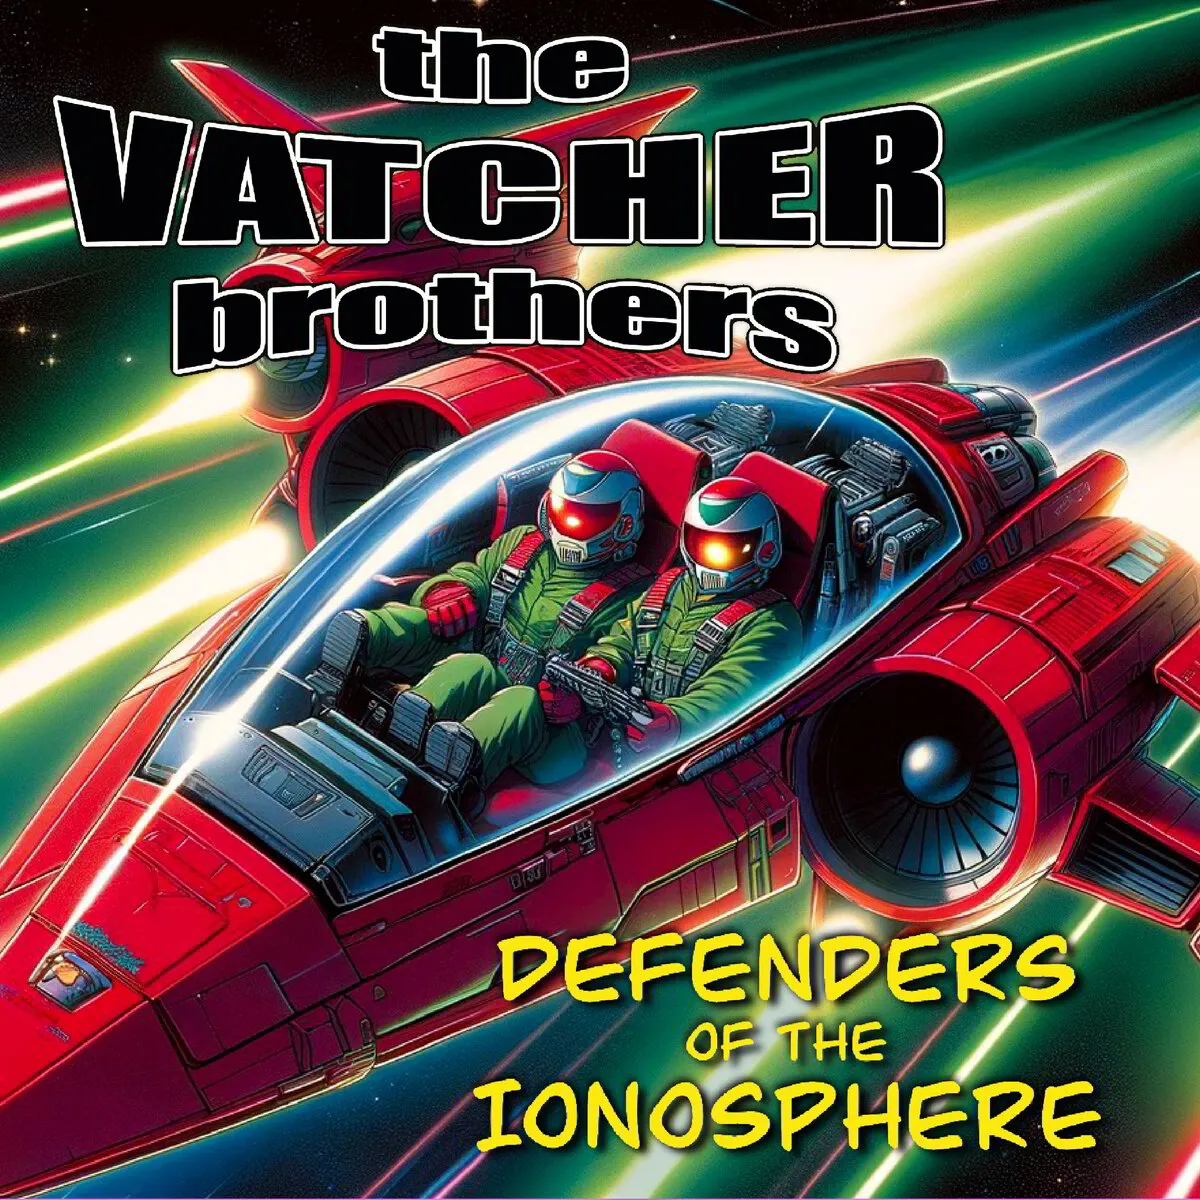 Defenders of the Ionosphere by the Vatcher Brothers